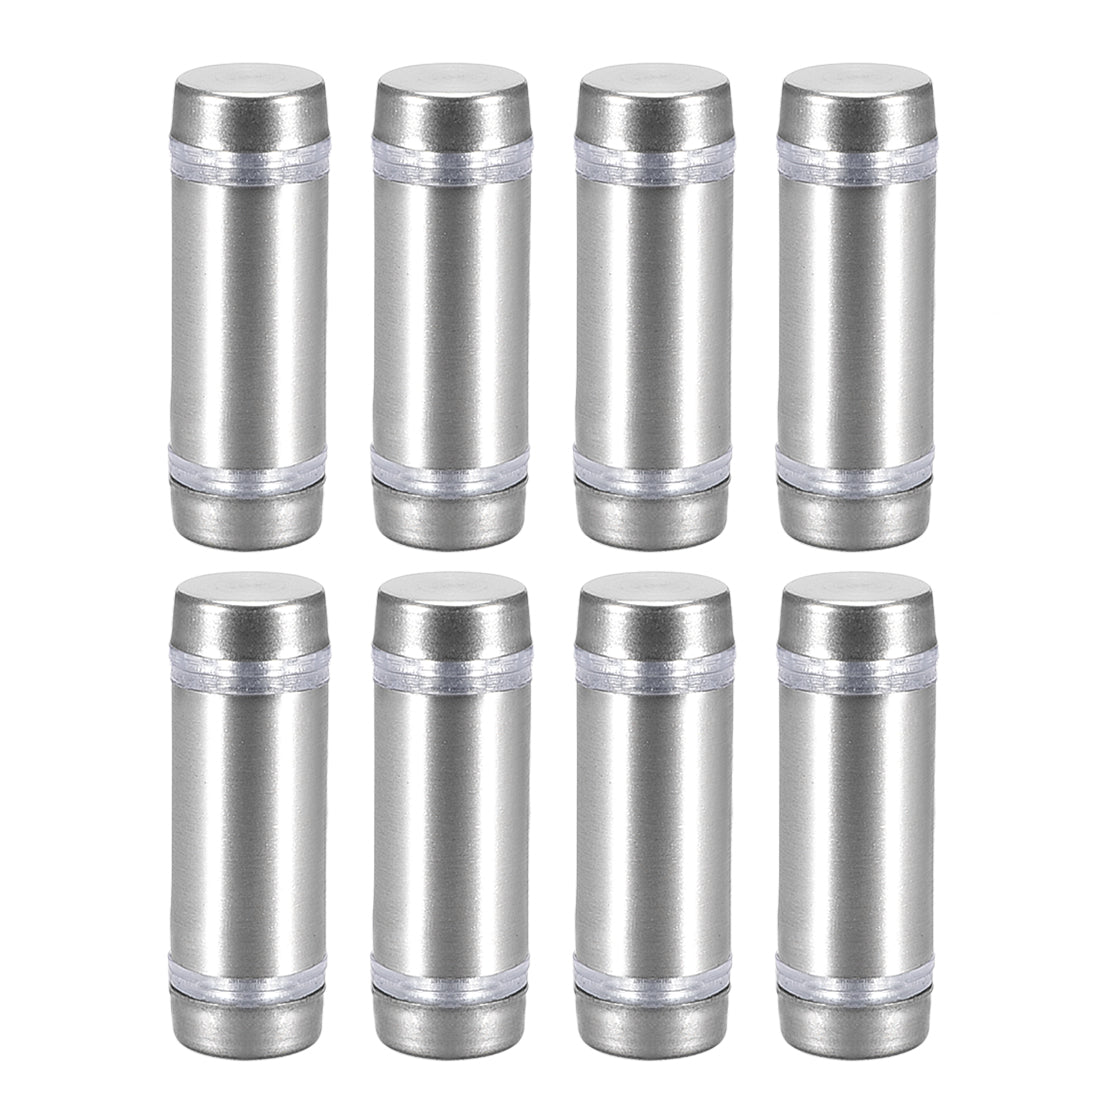 uxcell Uxcell Glass Standoff Double Head Stainless Steel Standoff Holder 12mm x 37mm 8 Pcs